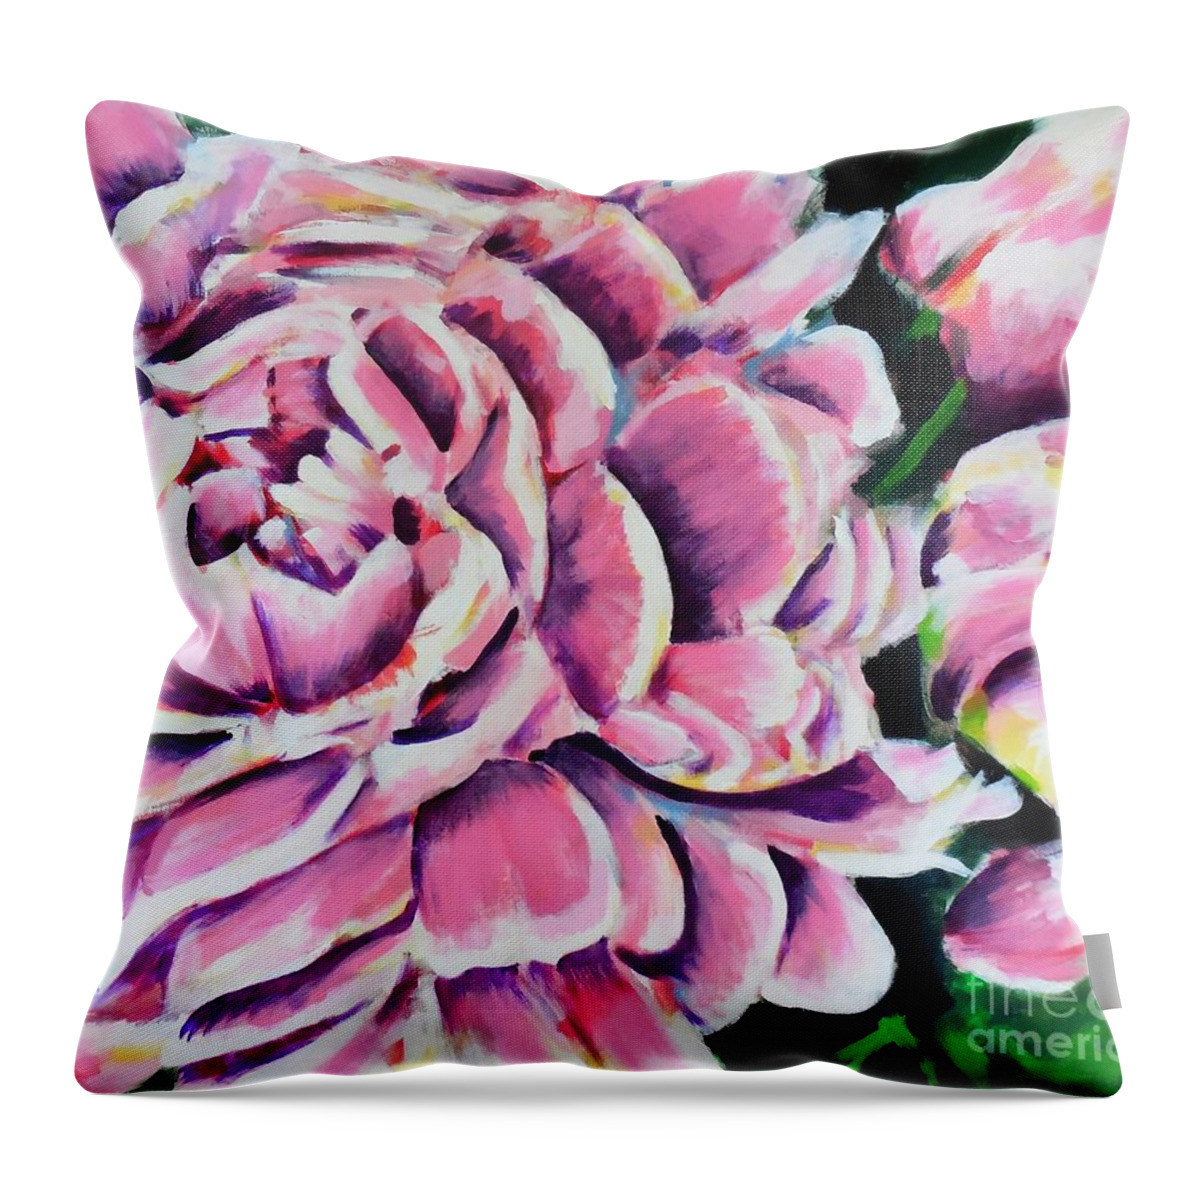 Peony Throw Pillow featuring the painting Pink Peonies by Cami Lee